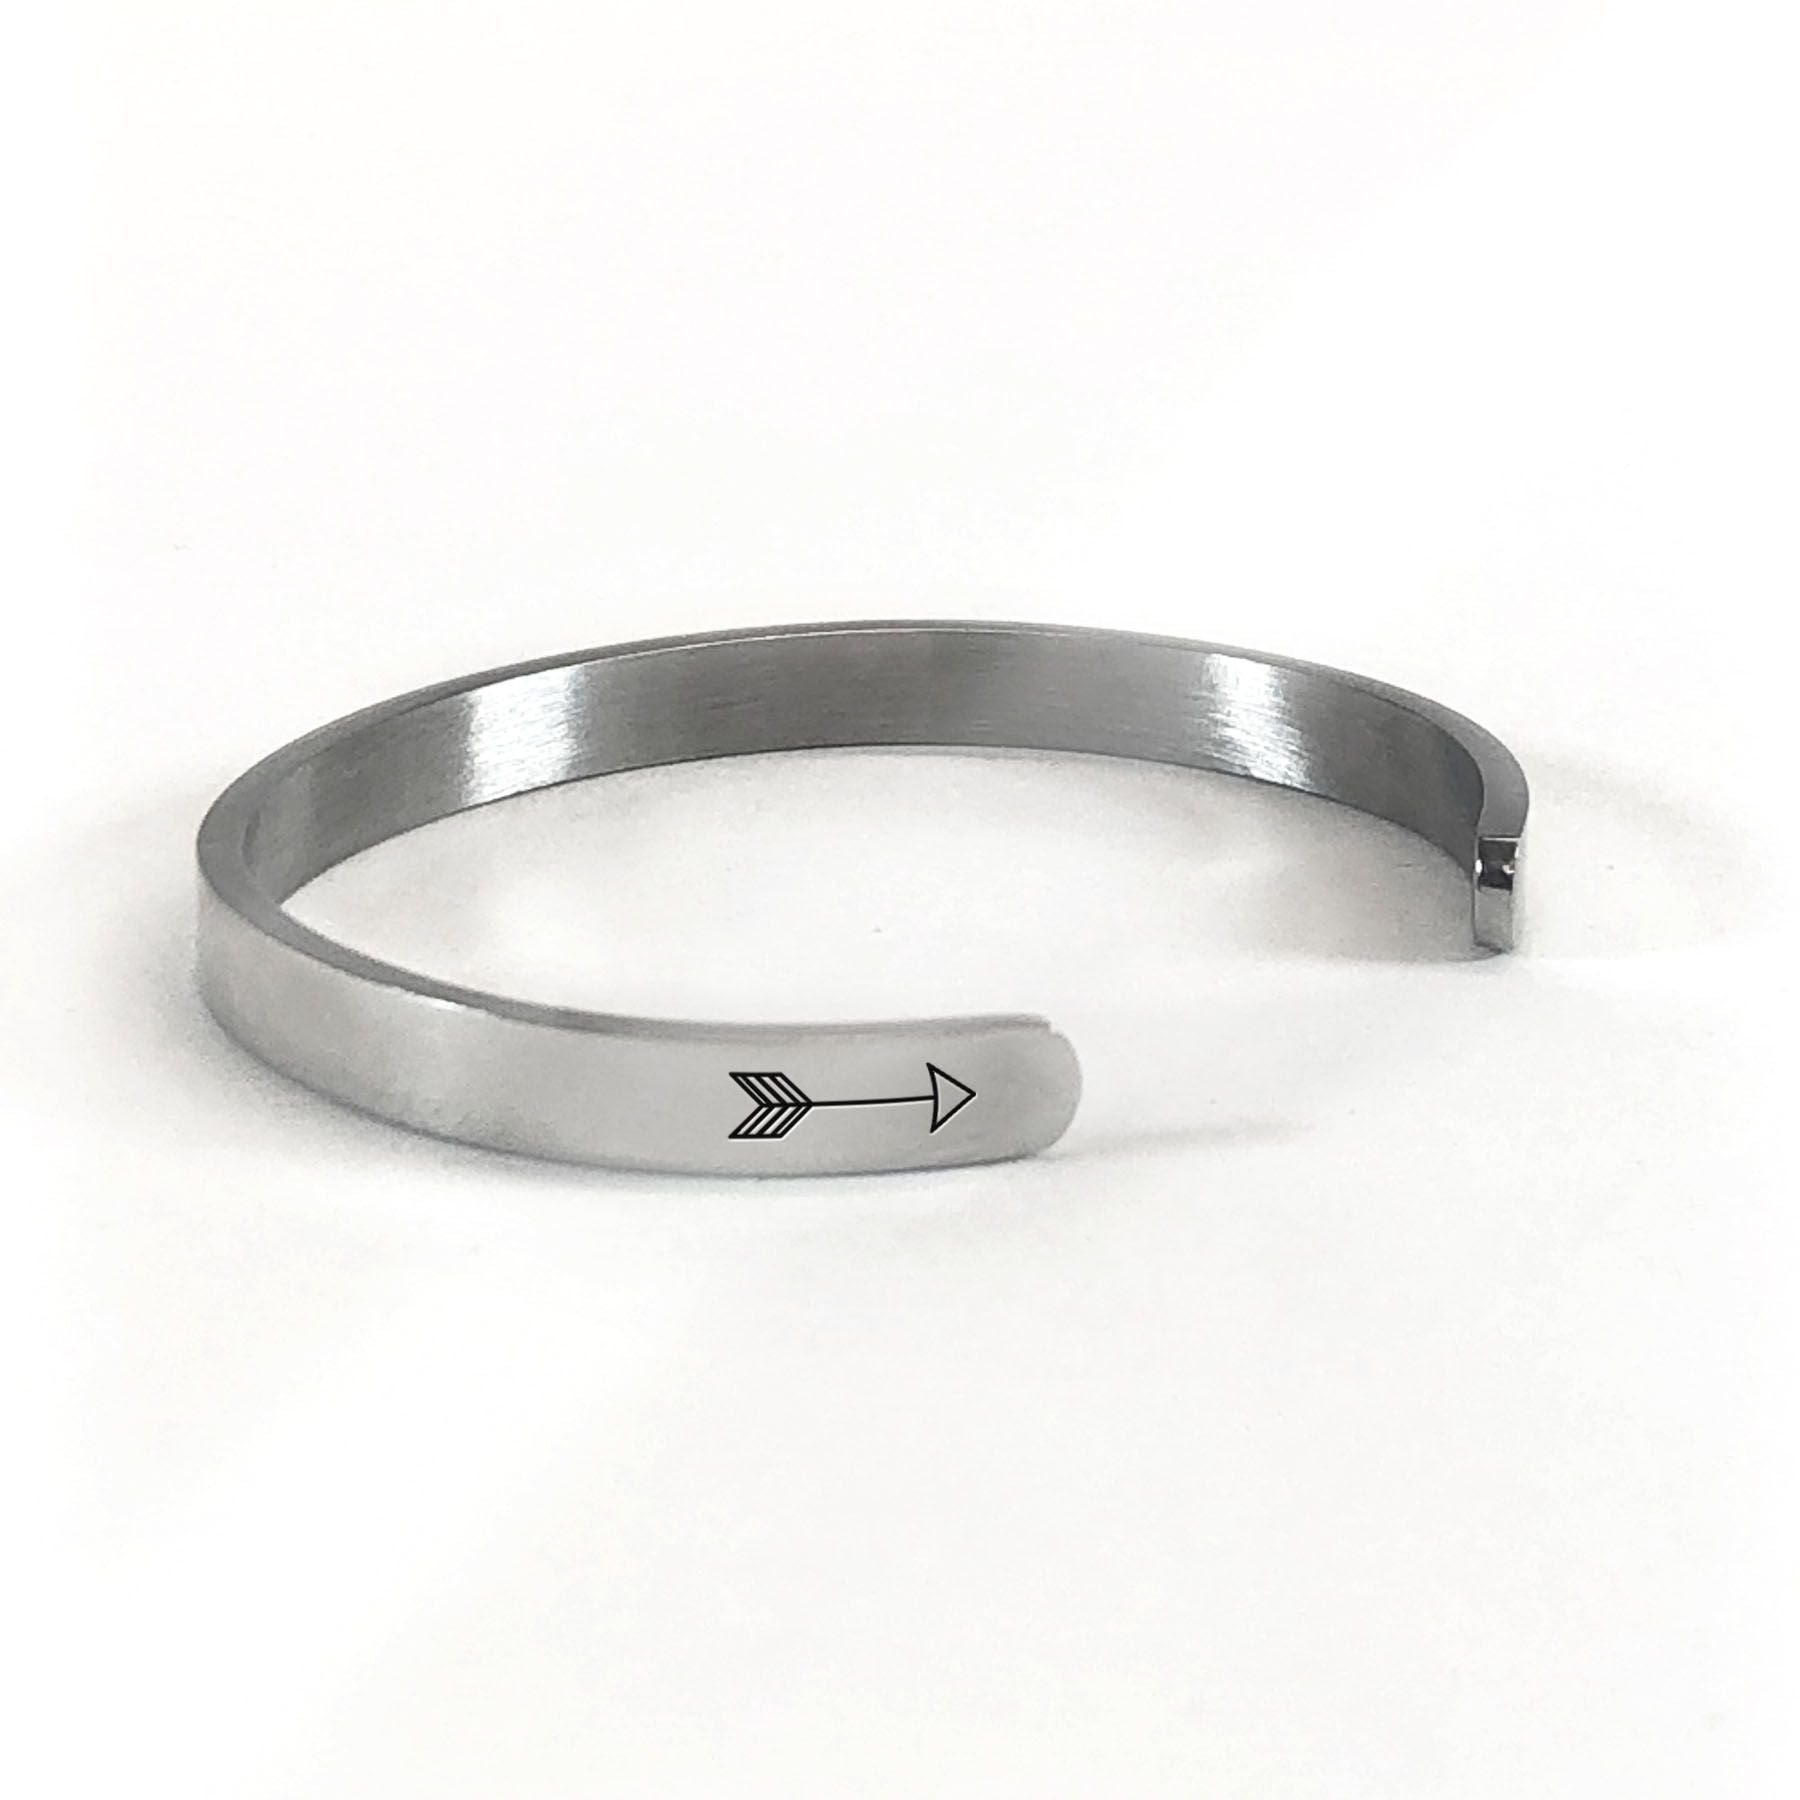 Home is where your mom is bracelet in silver rotated to show arrows and cuff opening